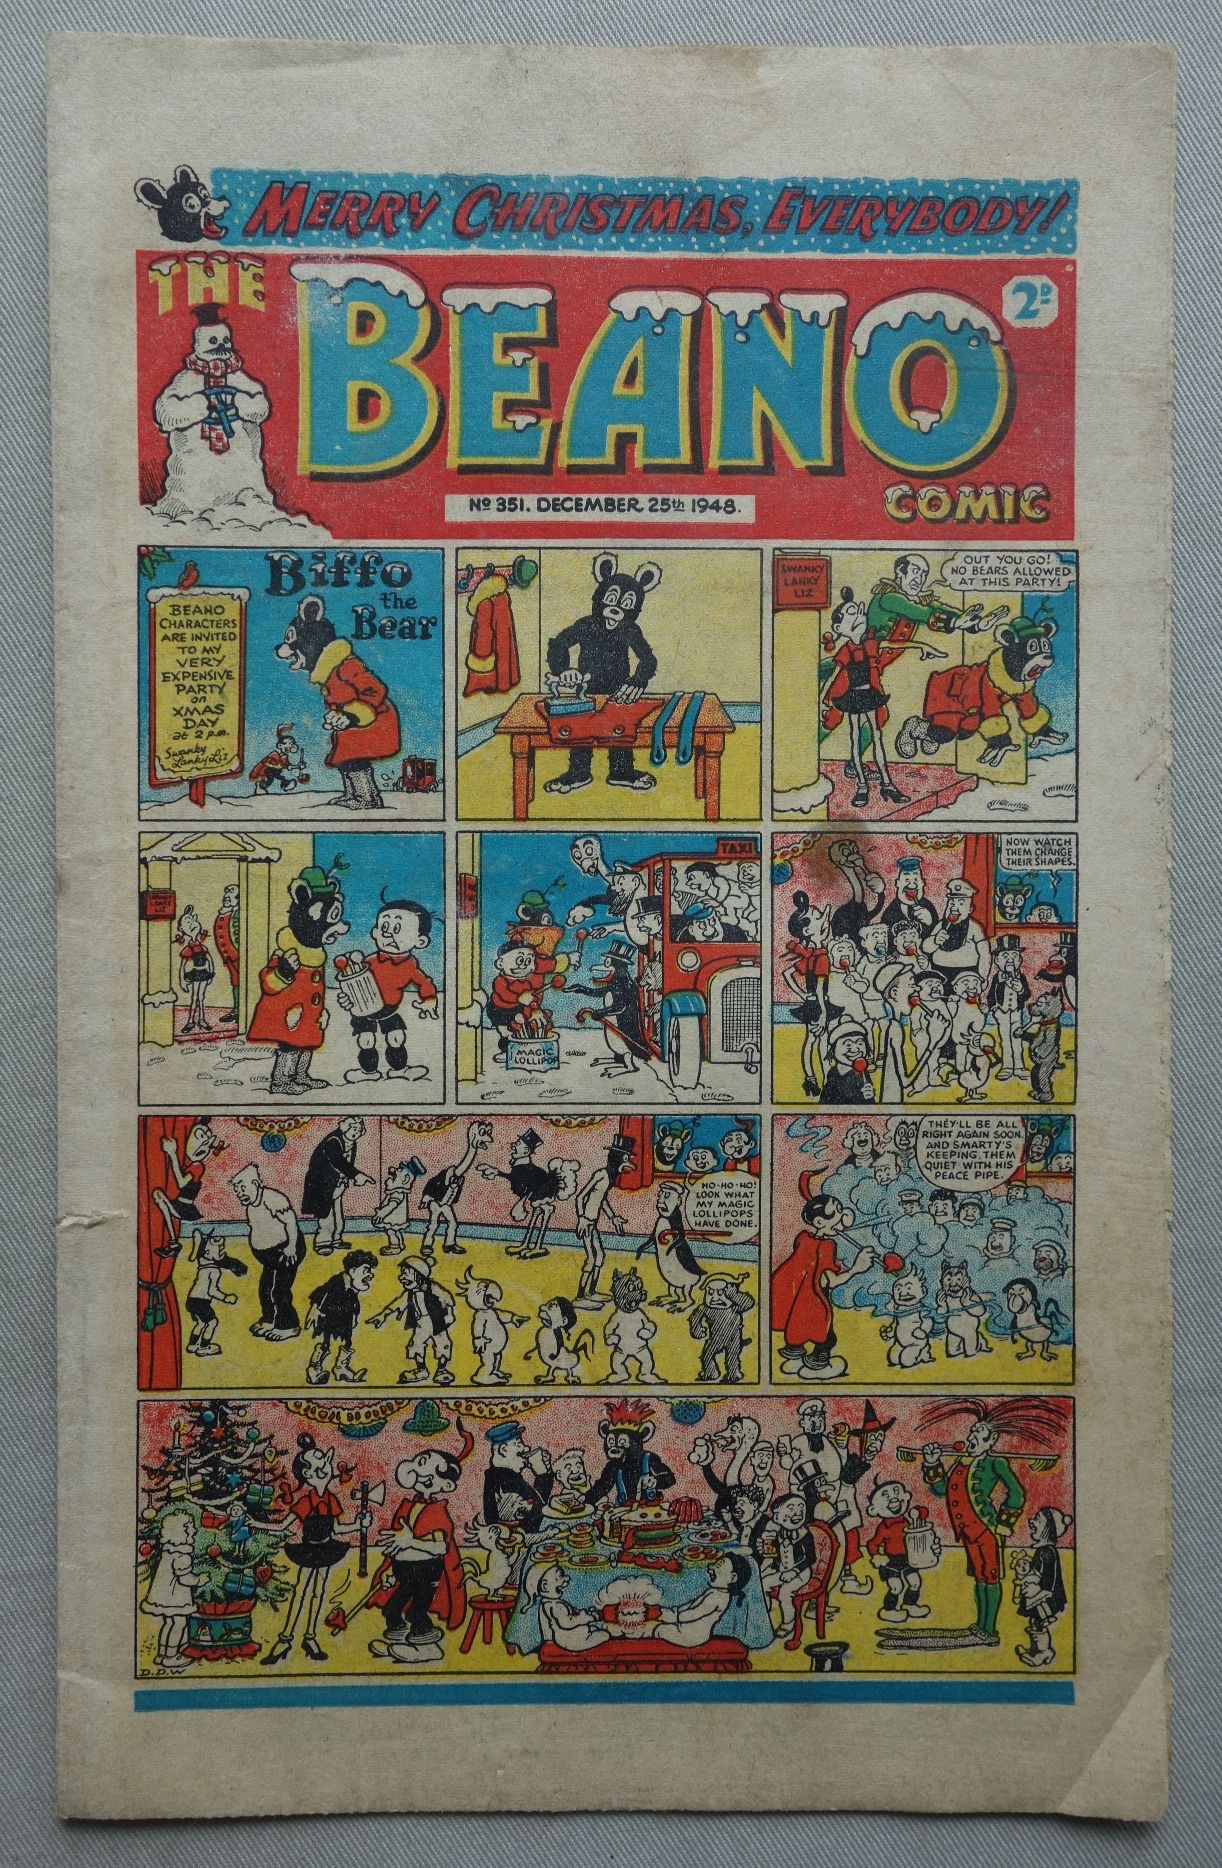 Beano No. 351 - cover dated 25th December 1948